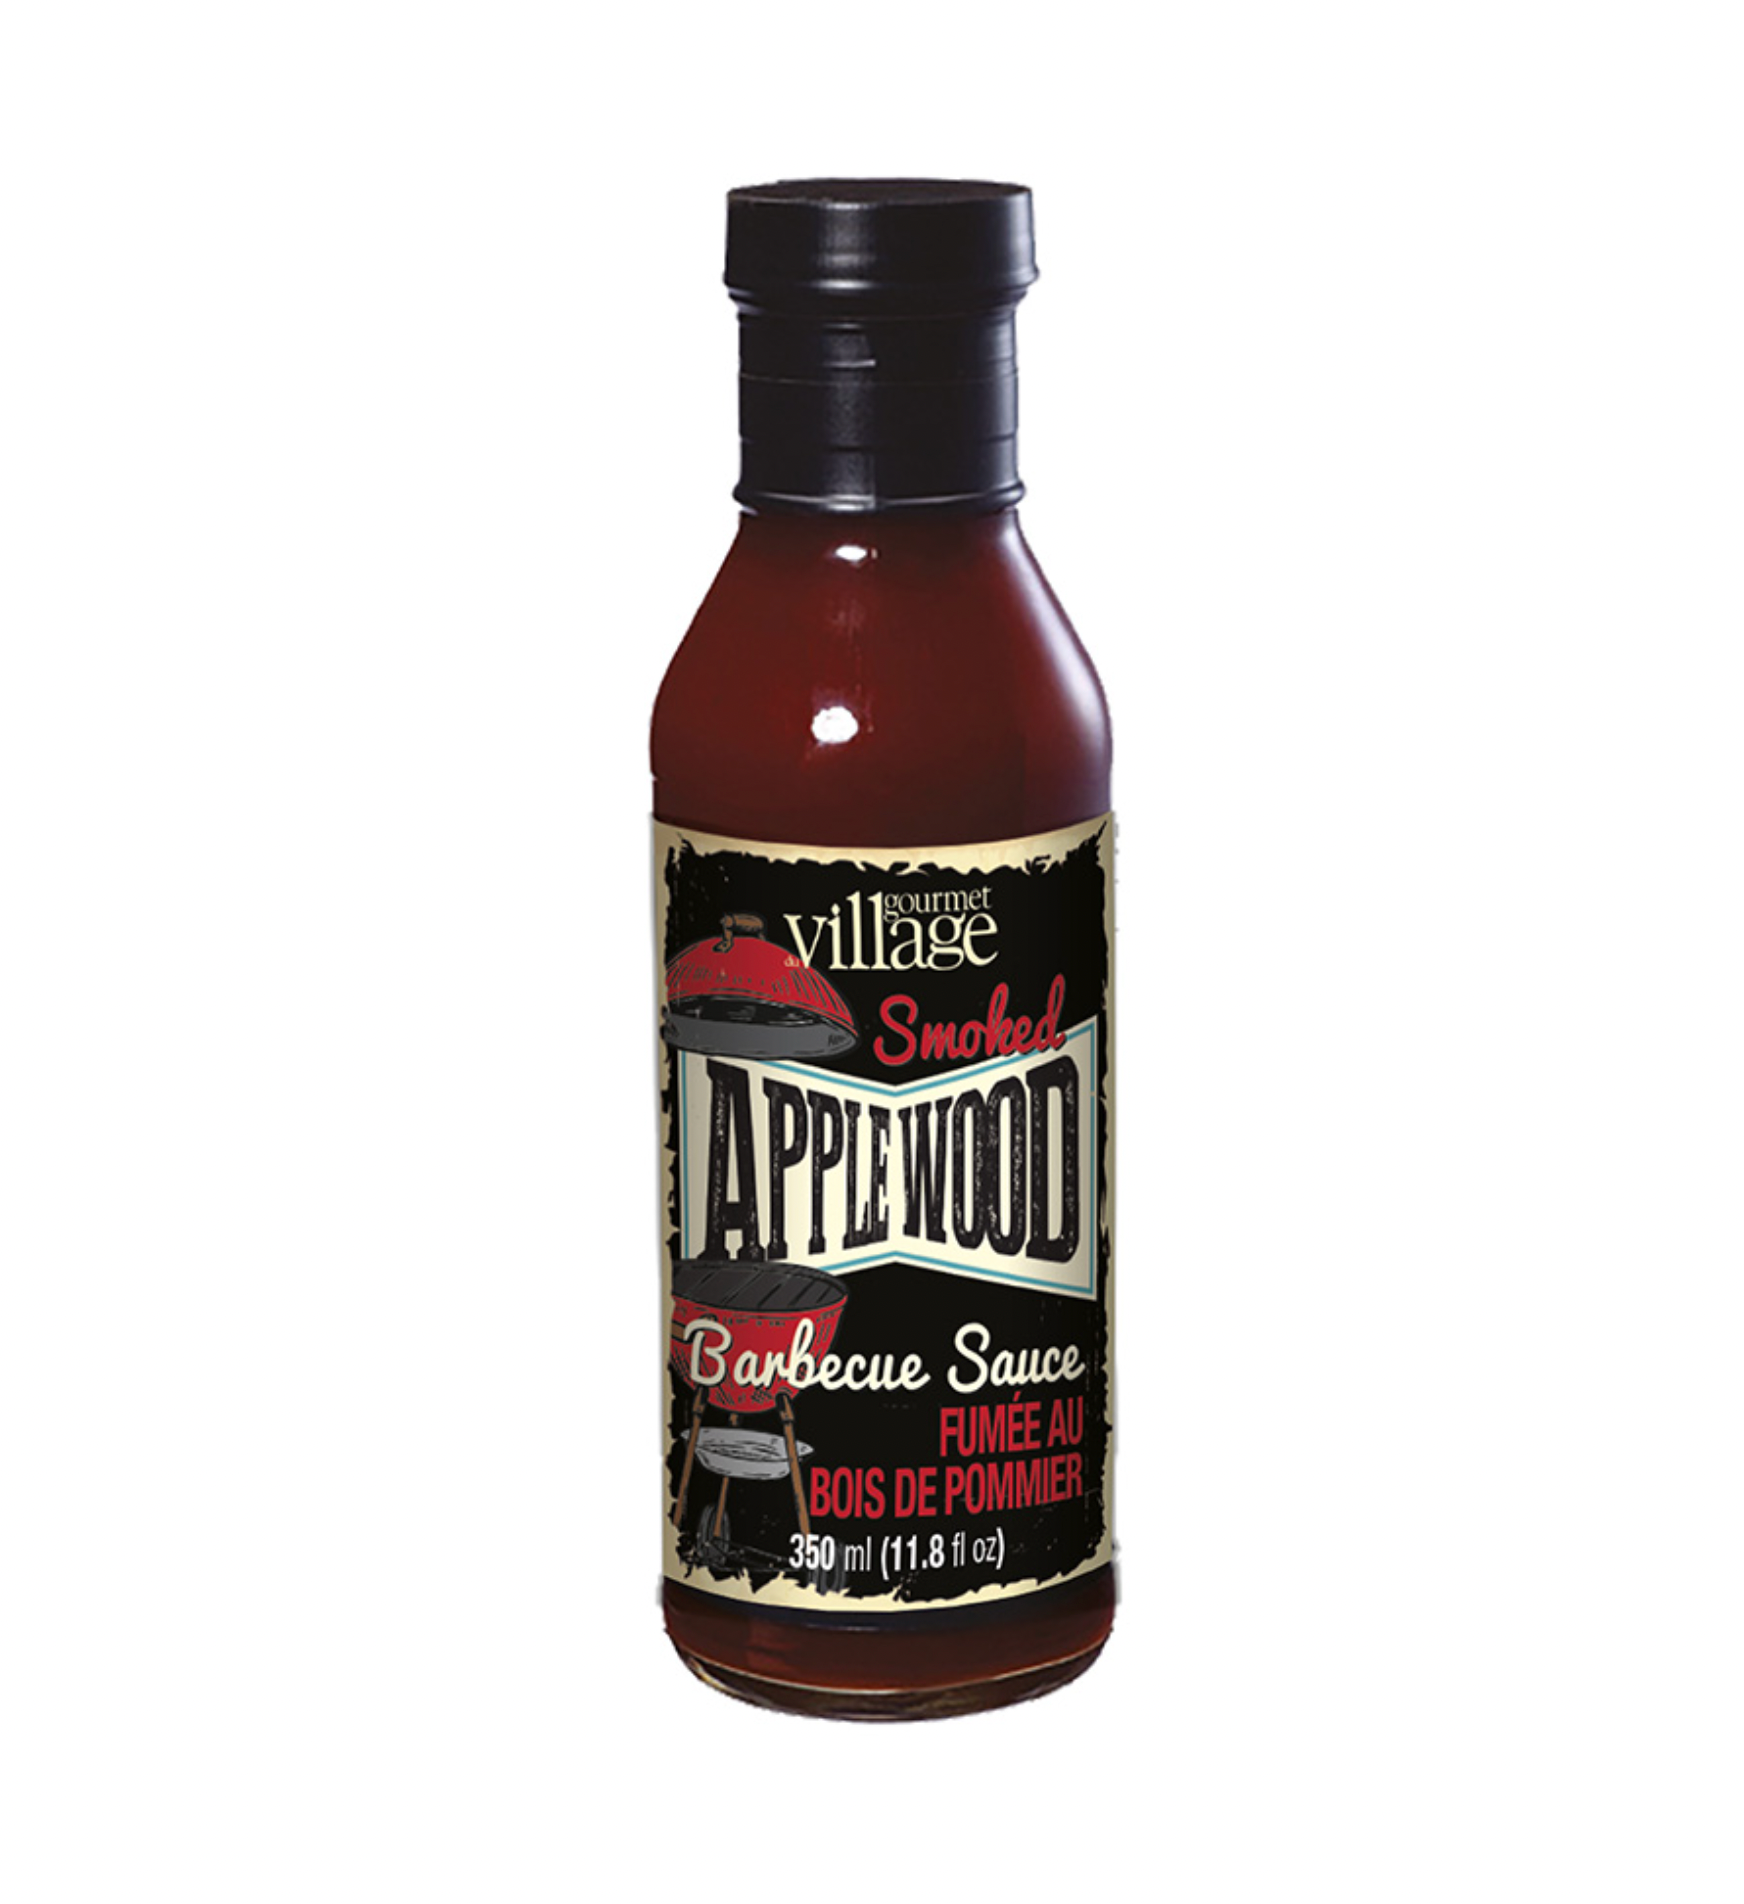 Smoked Applewood Barbecue Sauce